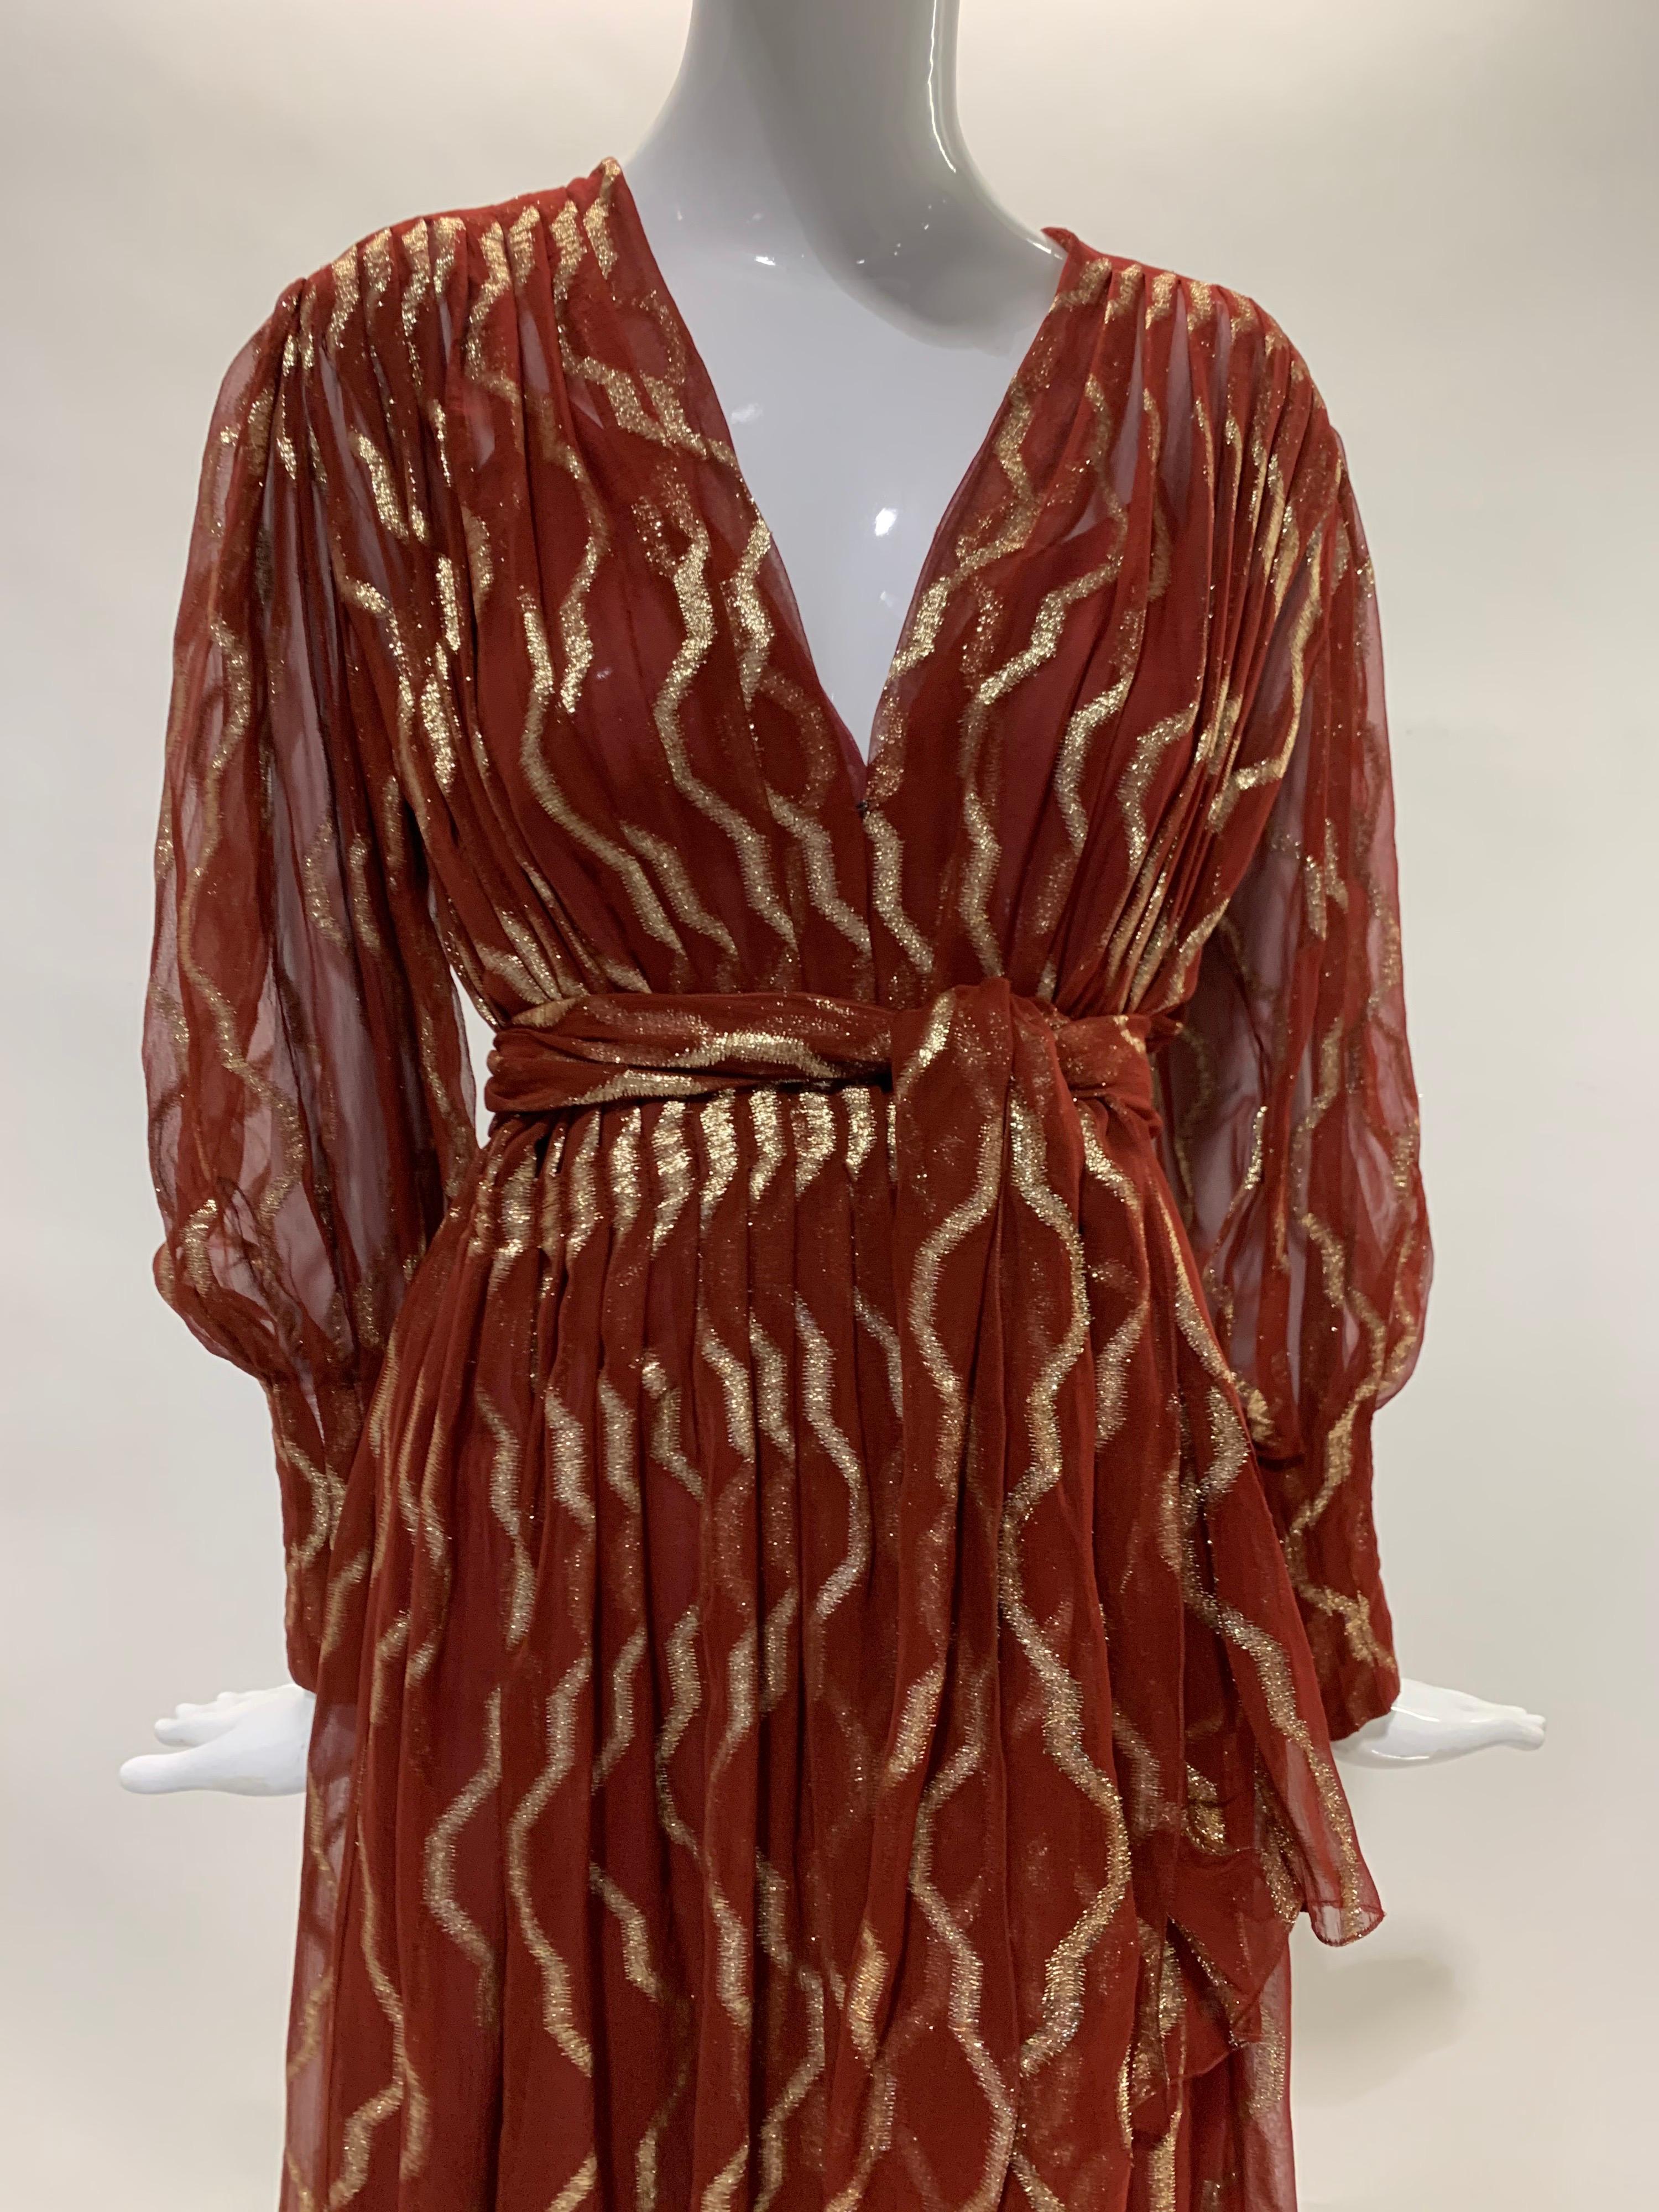 A graceful late 1970s/early 1980s Pauline Trigere carnelian-toned silk chiffon and lame pleated dress with surplice neckline and matching sash tie. Full balloon sleeves with wide zippered cuffs. Original princess-seamed silk chiffon slip with